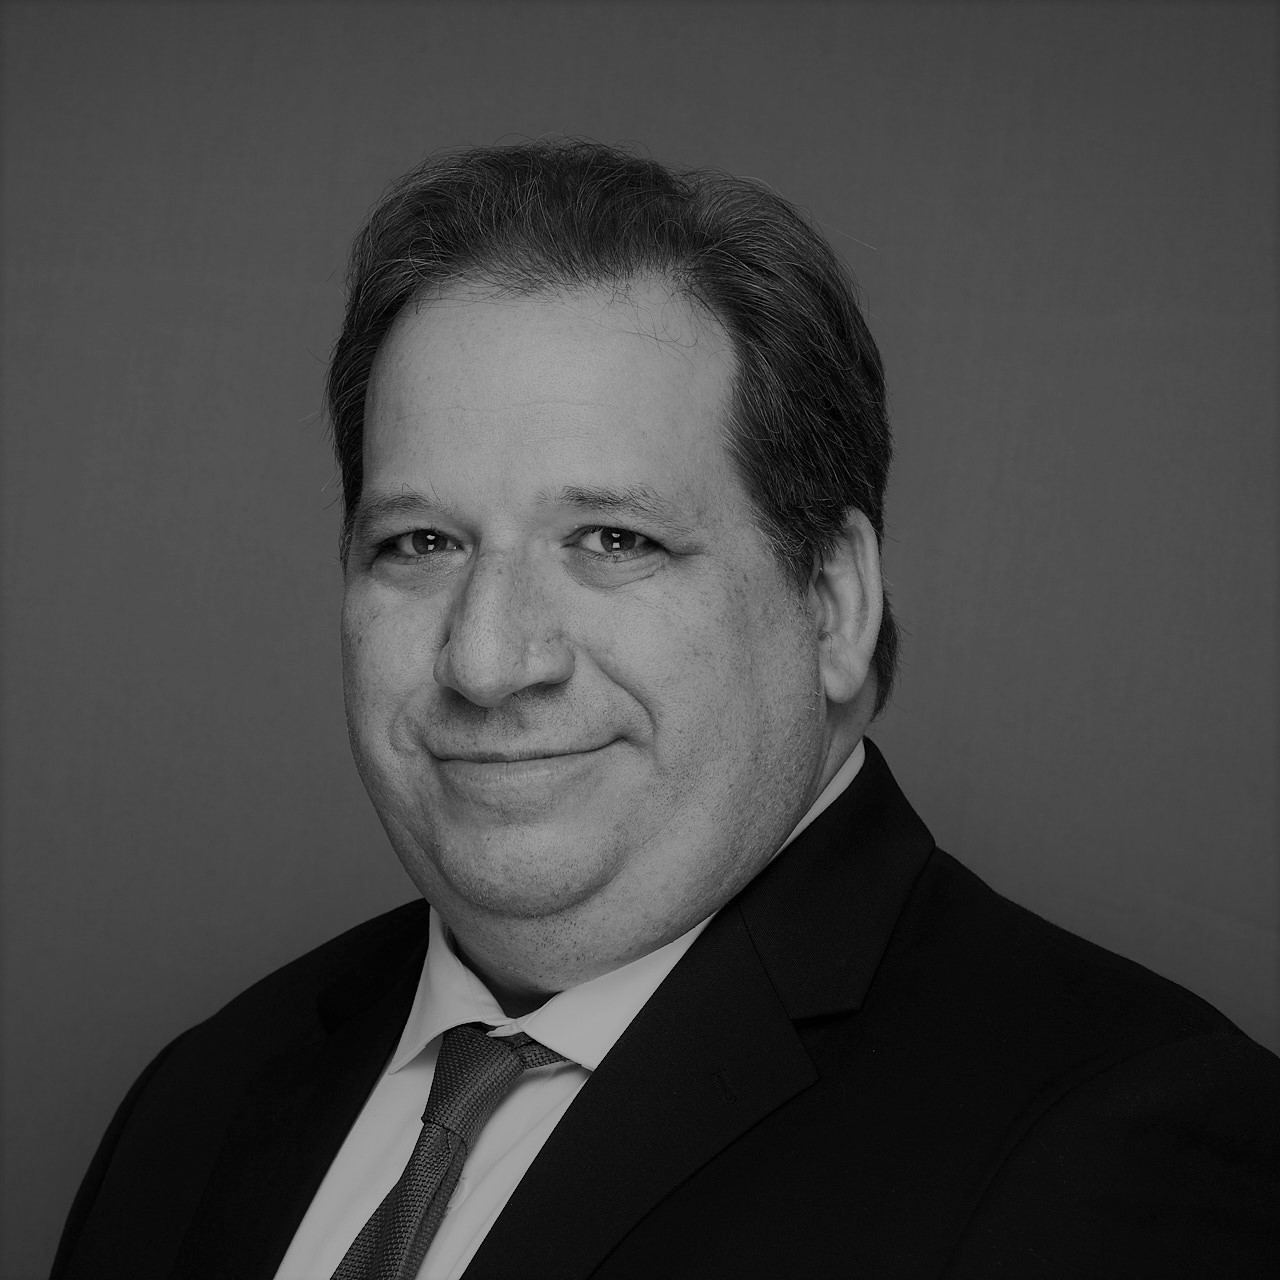 image: a black and white headshot of a man in business attire looking at the camera